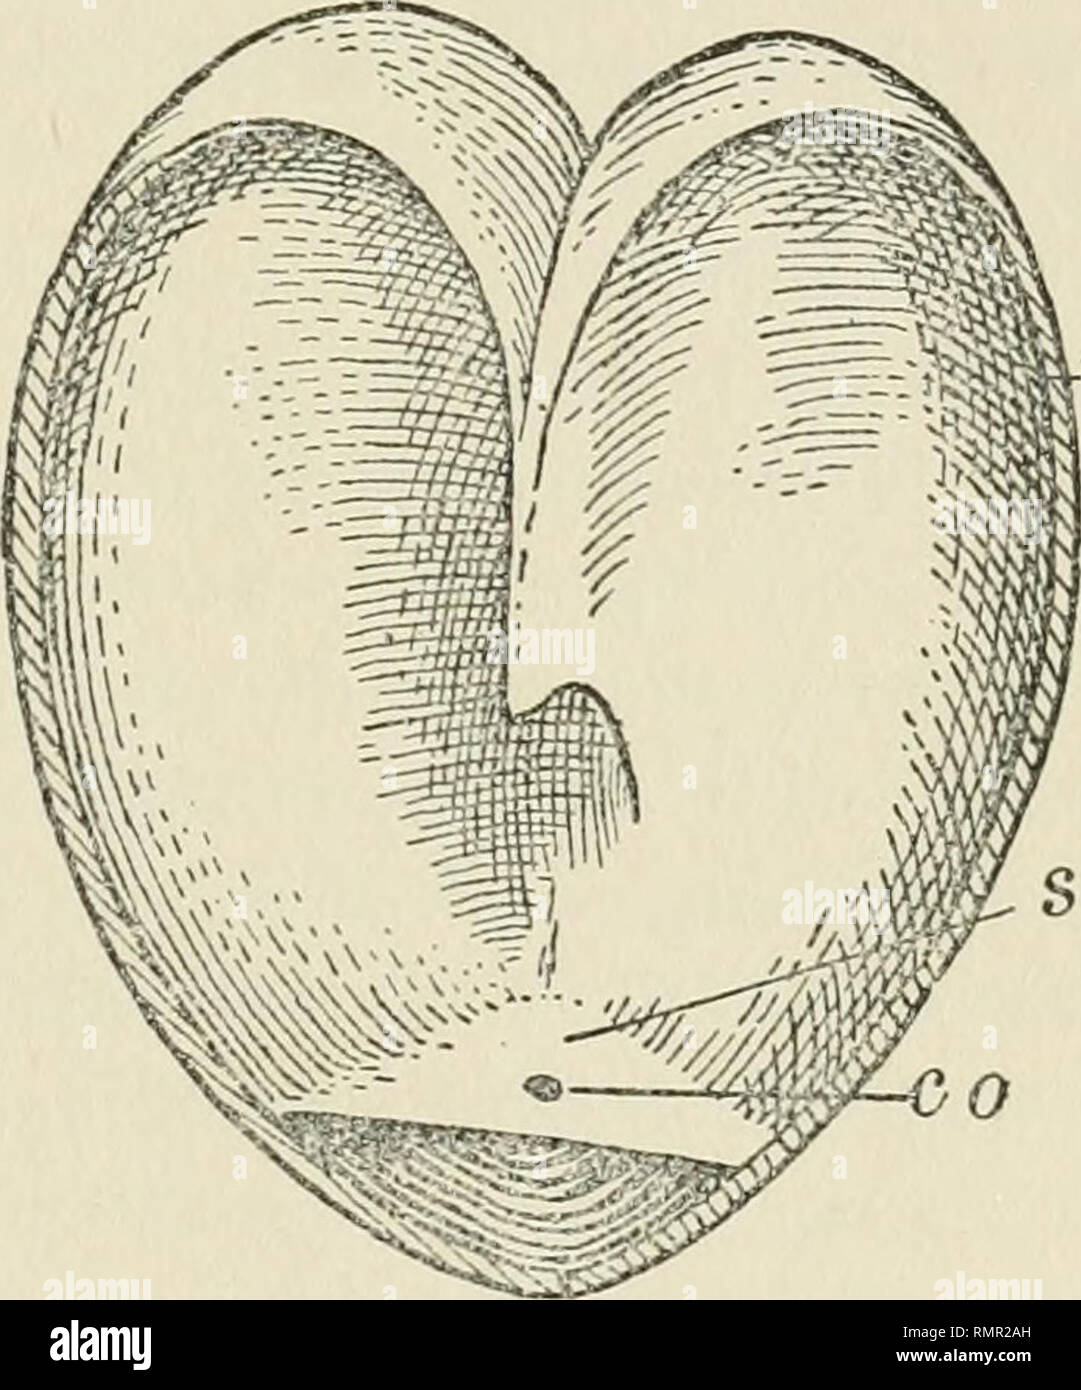 . Annals of the New York Academy of Sciences. Science; Science -- New York (State). ?im' CO. ini' A B Fig. 5. SwiM-BLADDER OF OpSANUS TAU. A. A specimen longitudinally bisected showing the position of the internal septum (s). c o, central opening of septum; i m, intrinsic muscle. B. Another specimen longitudinally bisected showing the variation of the internal septum (s). the same intrinsic muscles as that of the sea-robin. The muscles arise at the most anterior part of the right and left lobes respectively, and are separated posteriorly by only a small tendon. The muscular tissue is thick and Stock Photo